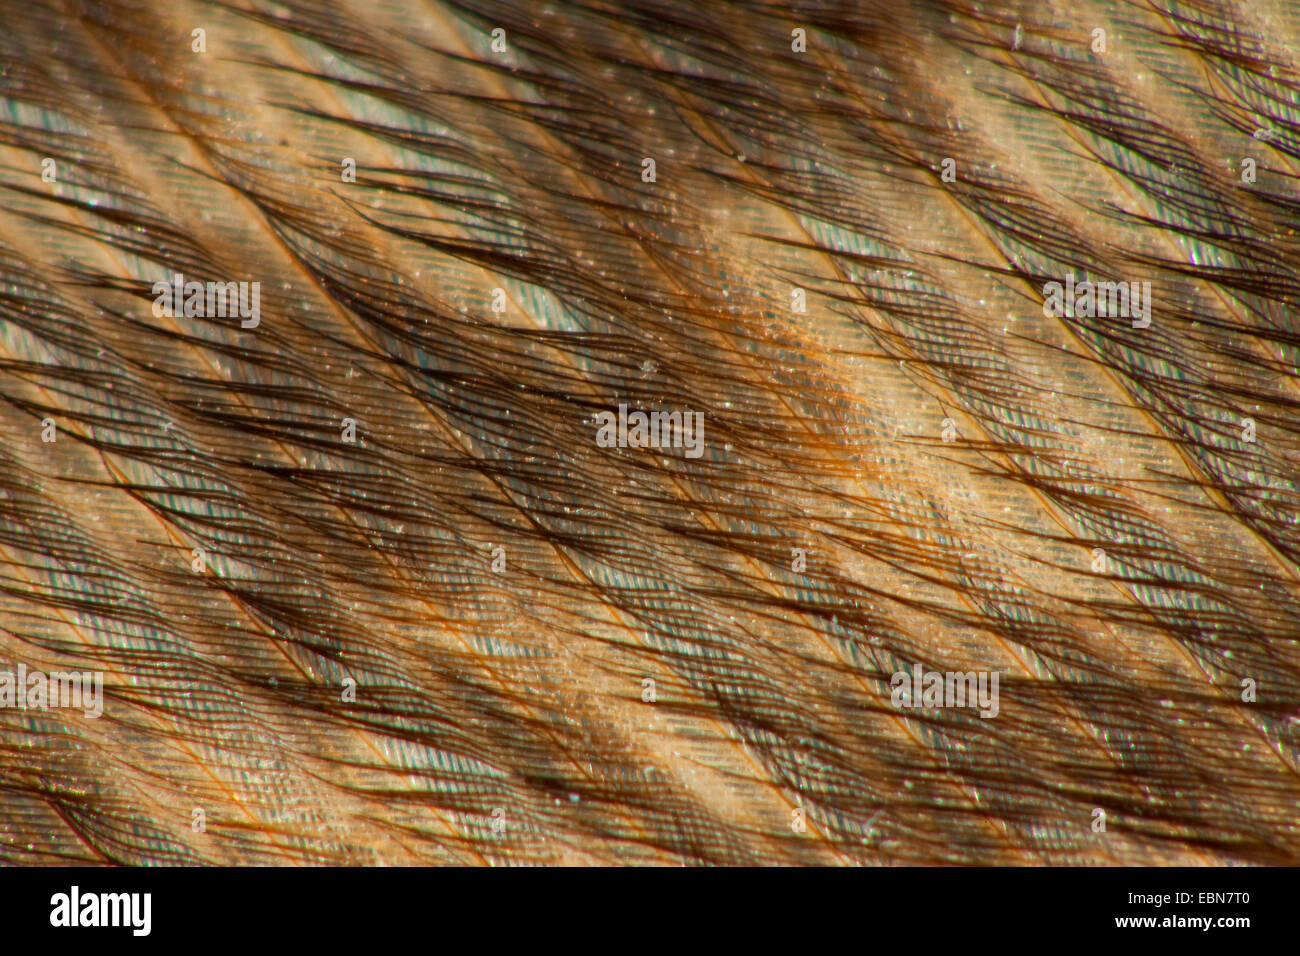 northern eagle owl (Bubo bubo), feather of a Norther eagle owl Stock Photo